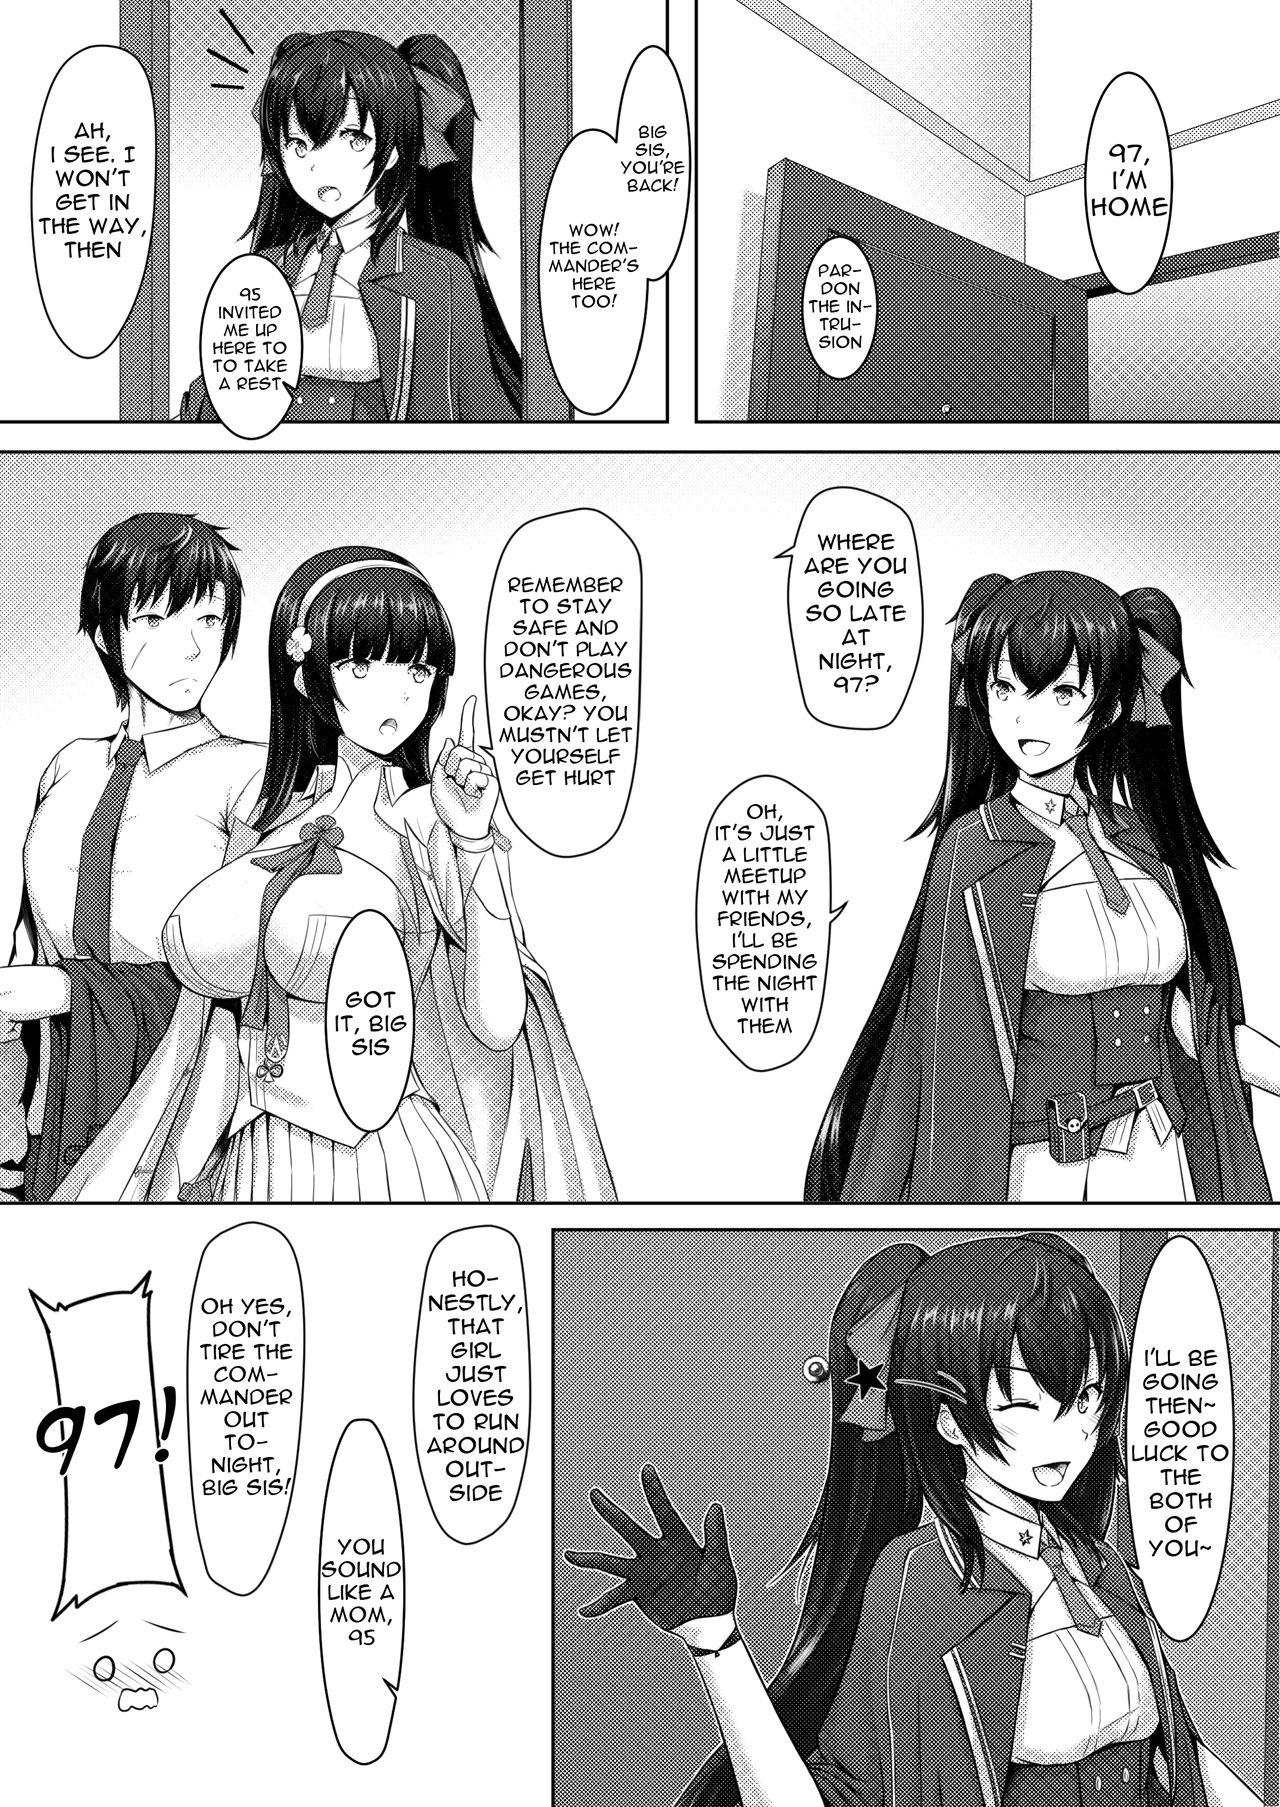 Foda A Lovely Flower's Gift - Girls frontline Fucked - Page 4